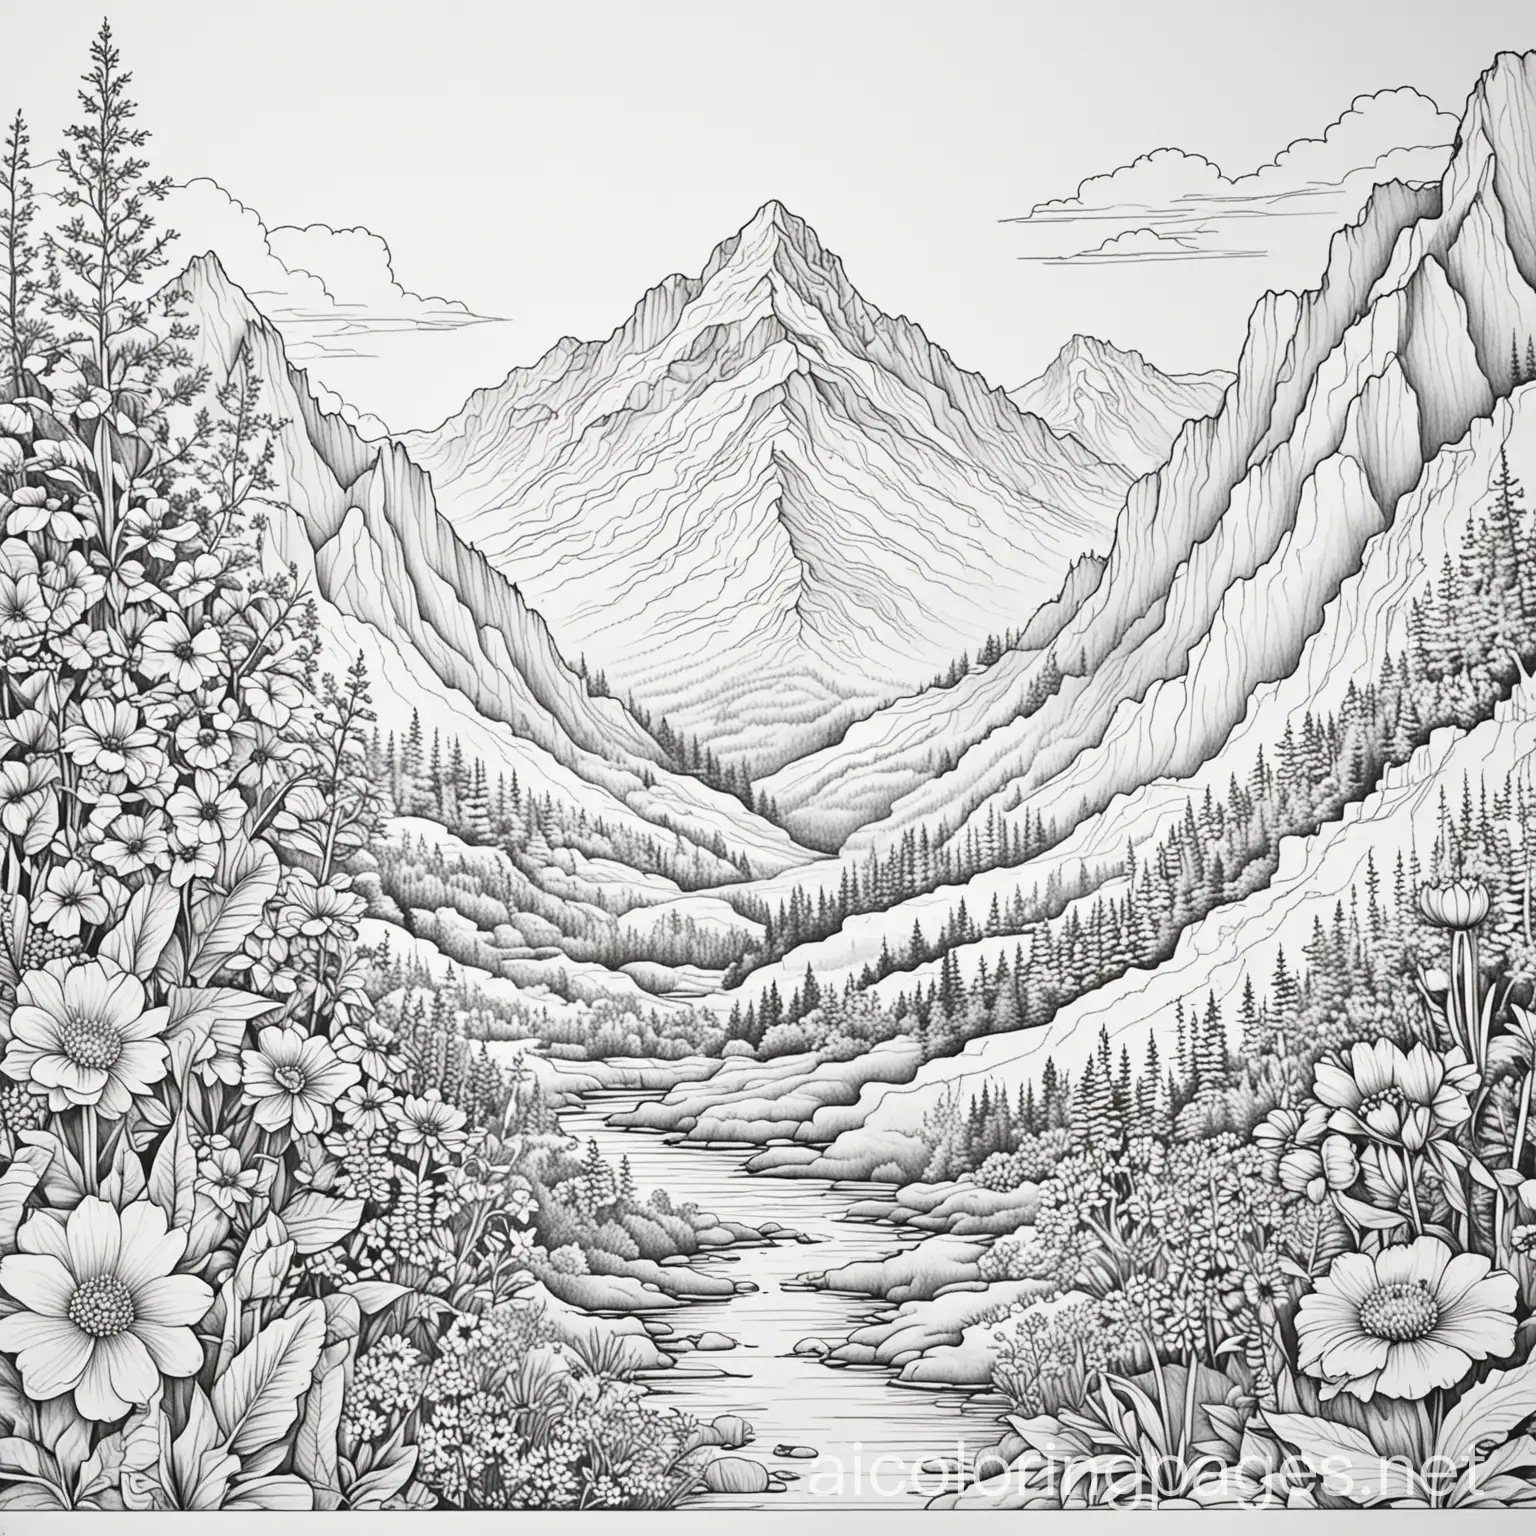 Floral-Mountain-Scene-Coloring-Page-for-Kids-Black-and-White-Line-Art